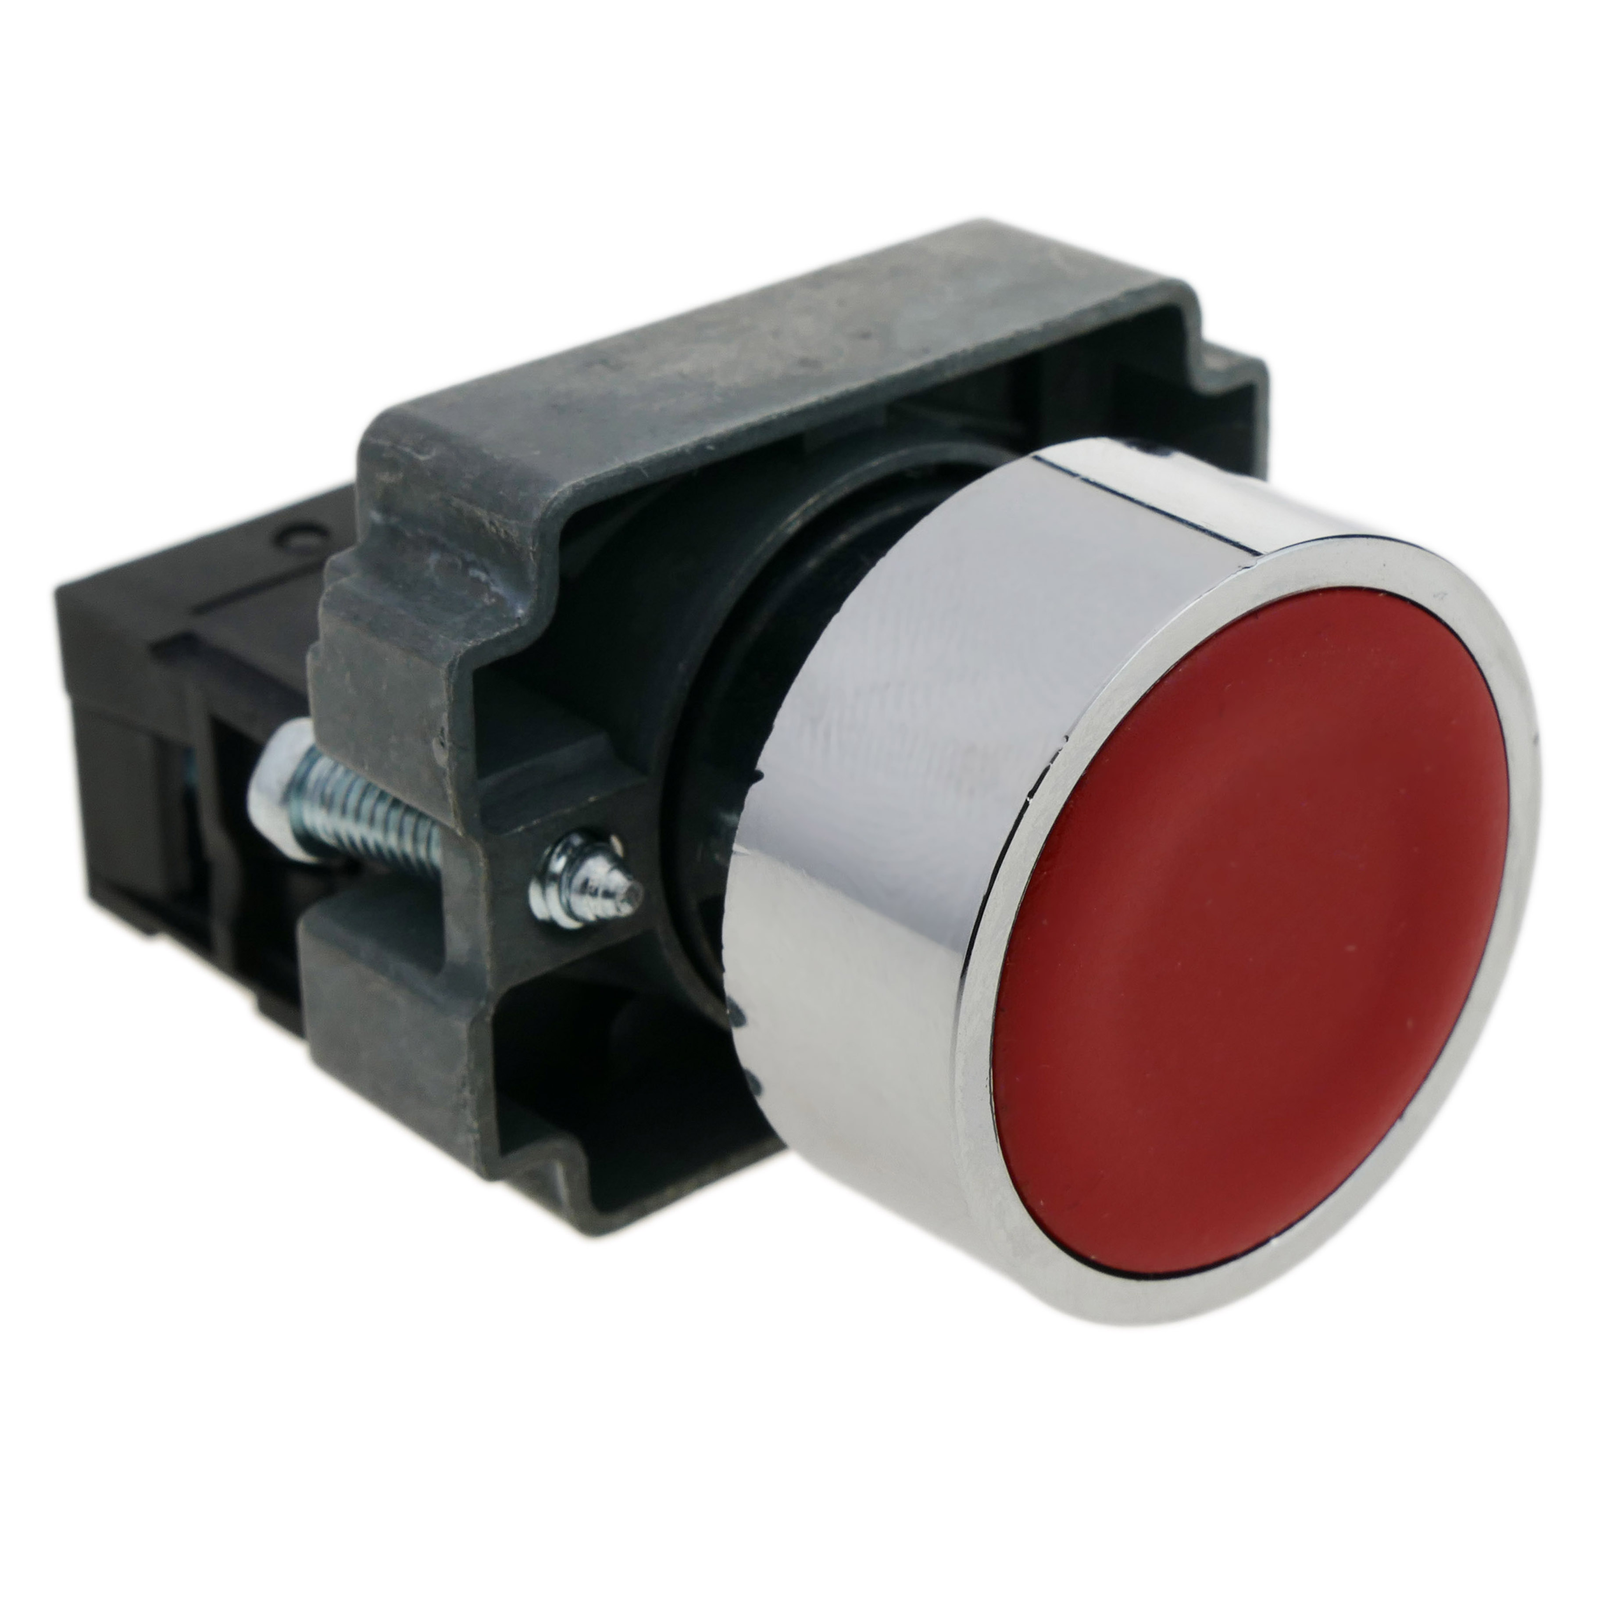 Push button momentary 22mm 1NO 400V 10A normally open green - Cablematic